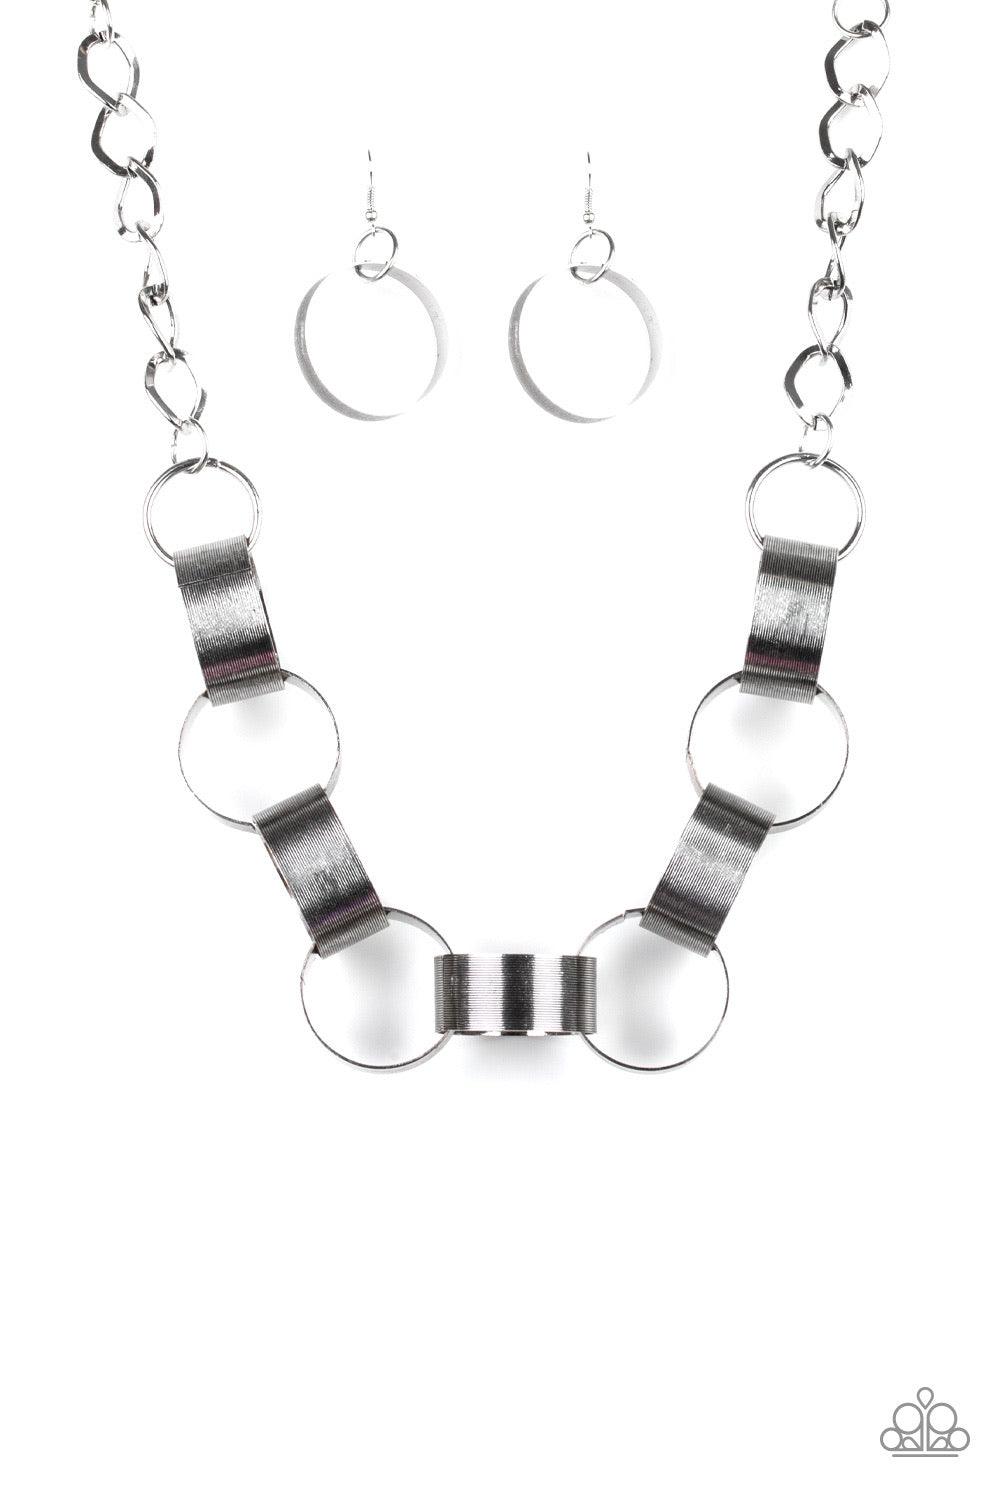 Paparazzi Accessories Big Hit - Silver Etched in linear patterns, dramatically oversized silver links connect below the collar for a bold statement-making look. Features an adjustable clasp closure. Jewelry